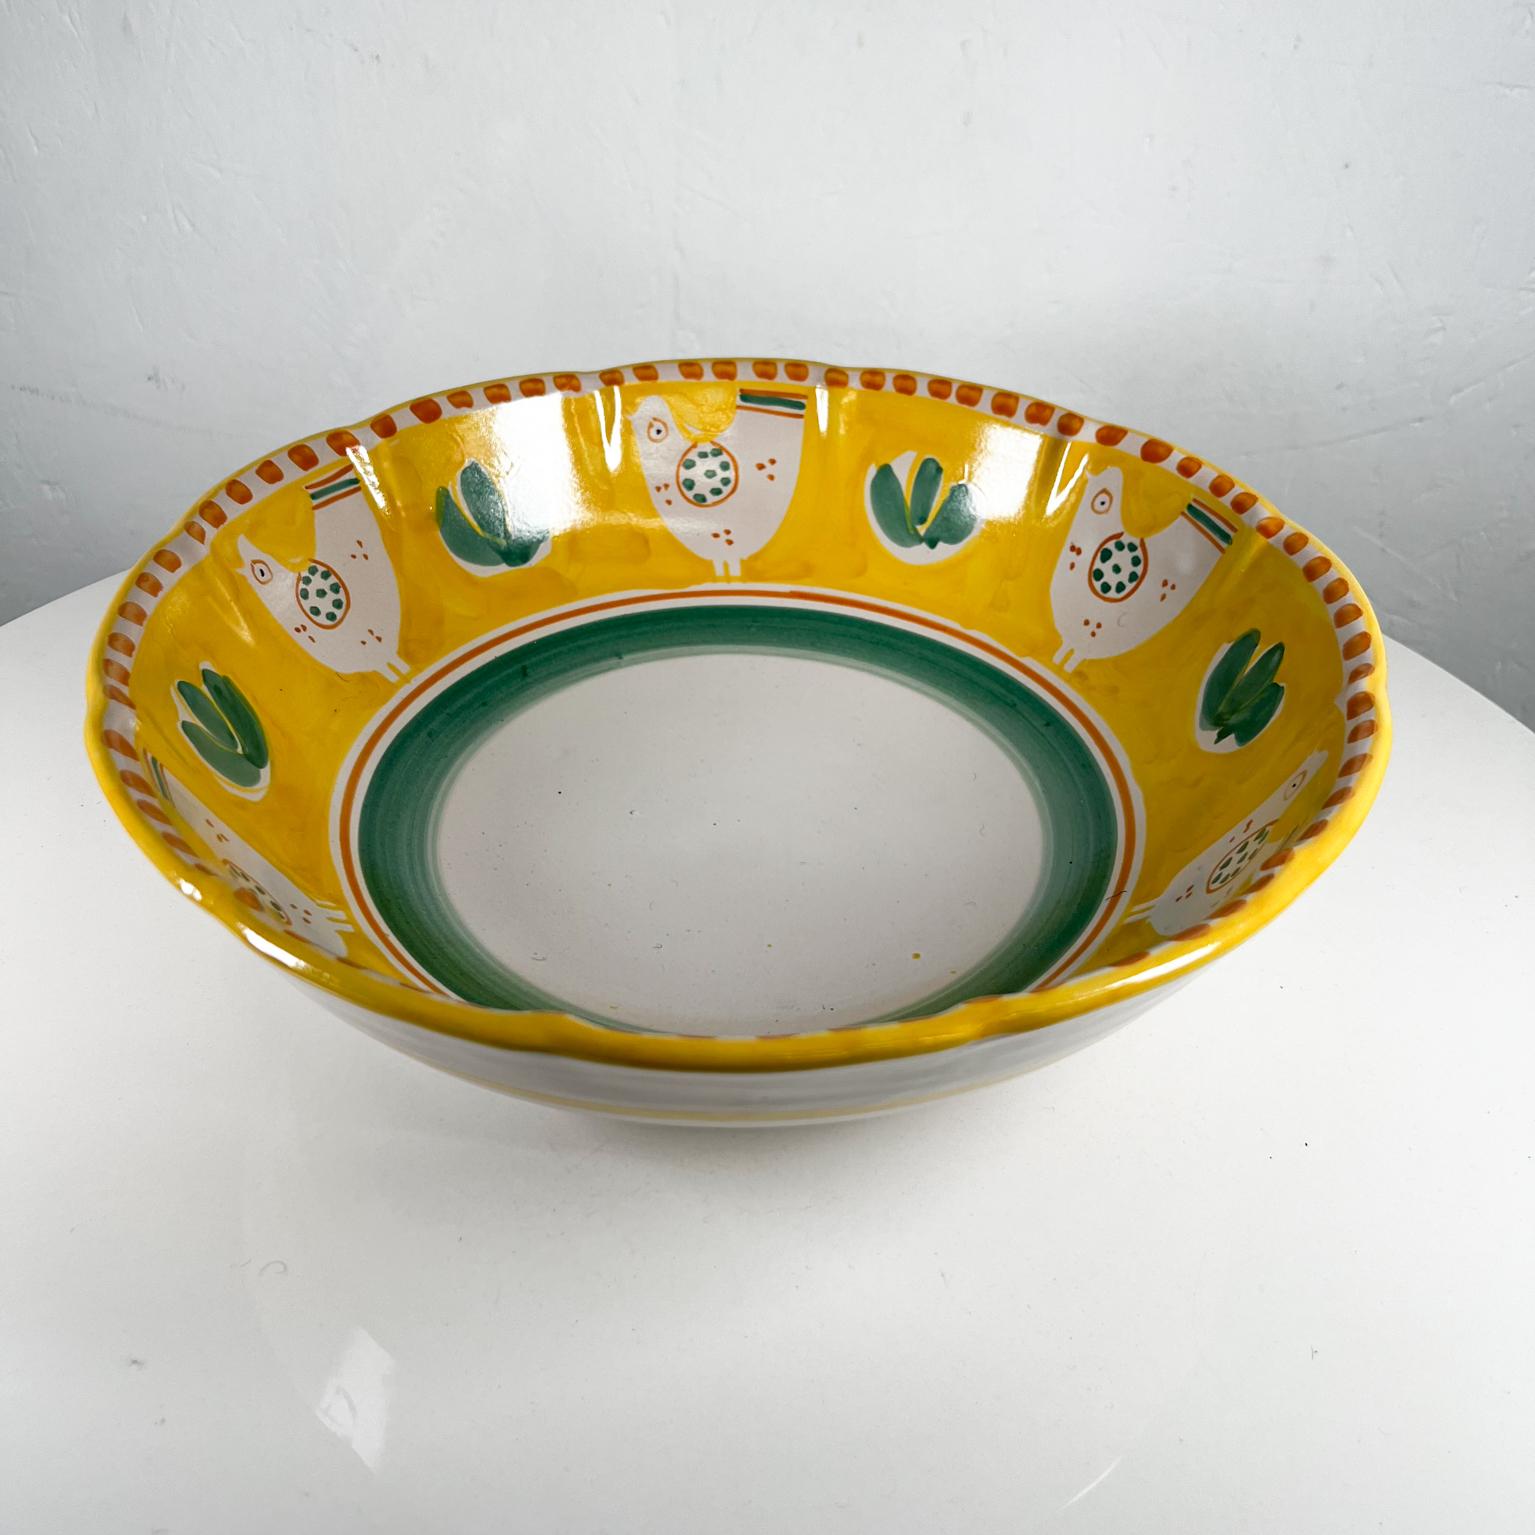 1980s Solimene Vietri Chicks Hand Painted Ceramic Bowl Yellow and Green Italy
12.5 x 3.63 tall
Large festive bowl plate
signed Solimene Italy
Vintage original condition, see images presented.